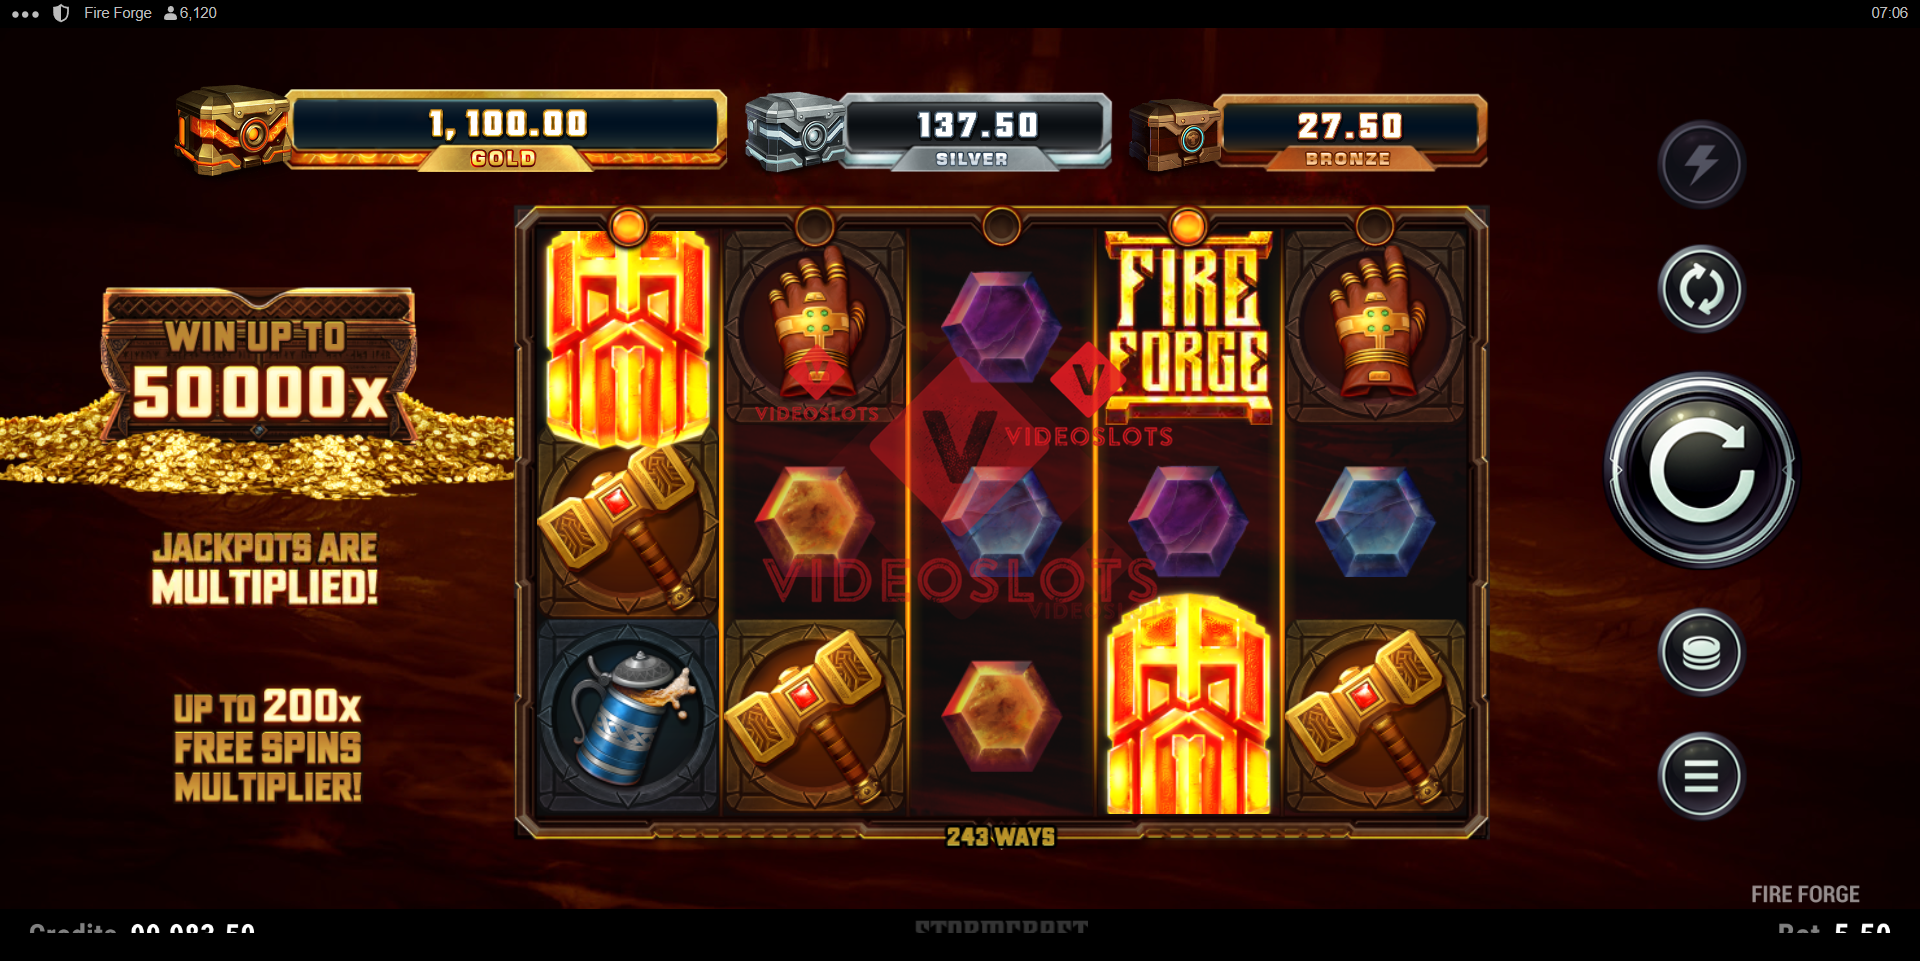 Base Game for Fire Forge slot for Microgaming